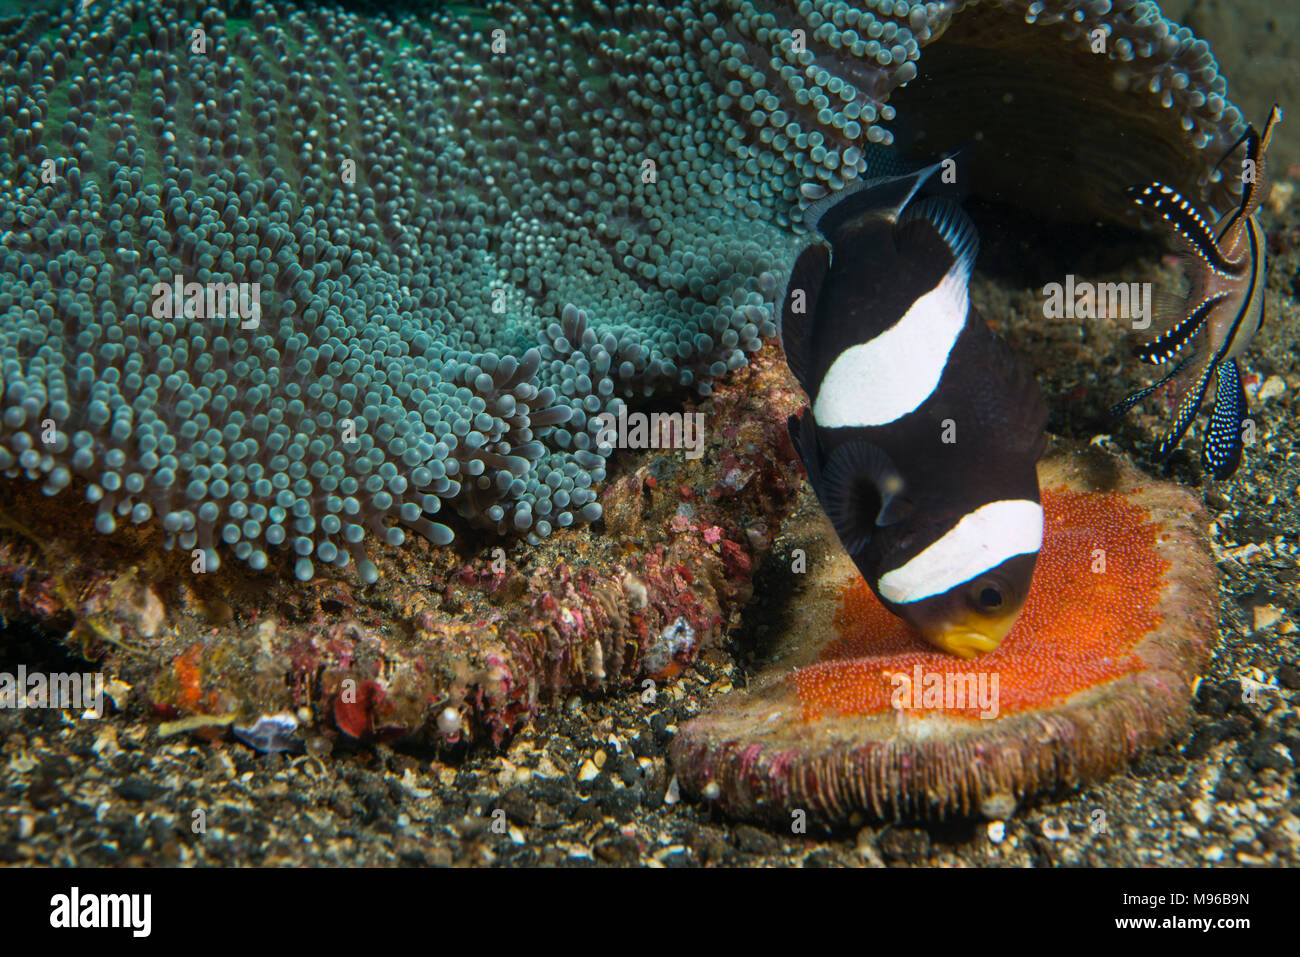 Saddleback Anemonefish, Amphiprion polymnus, with eggs, by a Haddon's carpet anemone, Stichodactyla haddoni, Lembeh Strait, Pacific Ocean Stock Photo